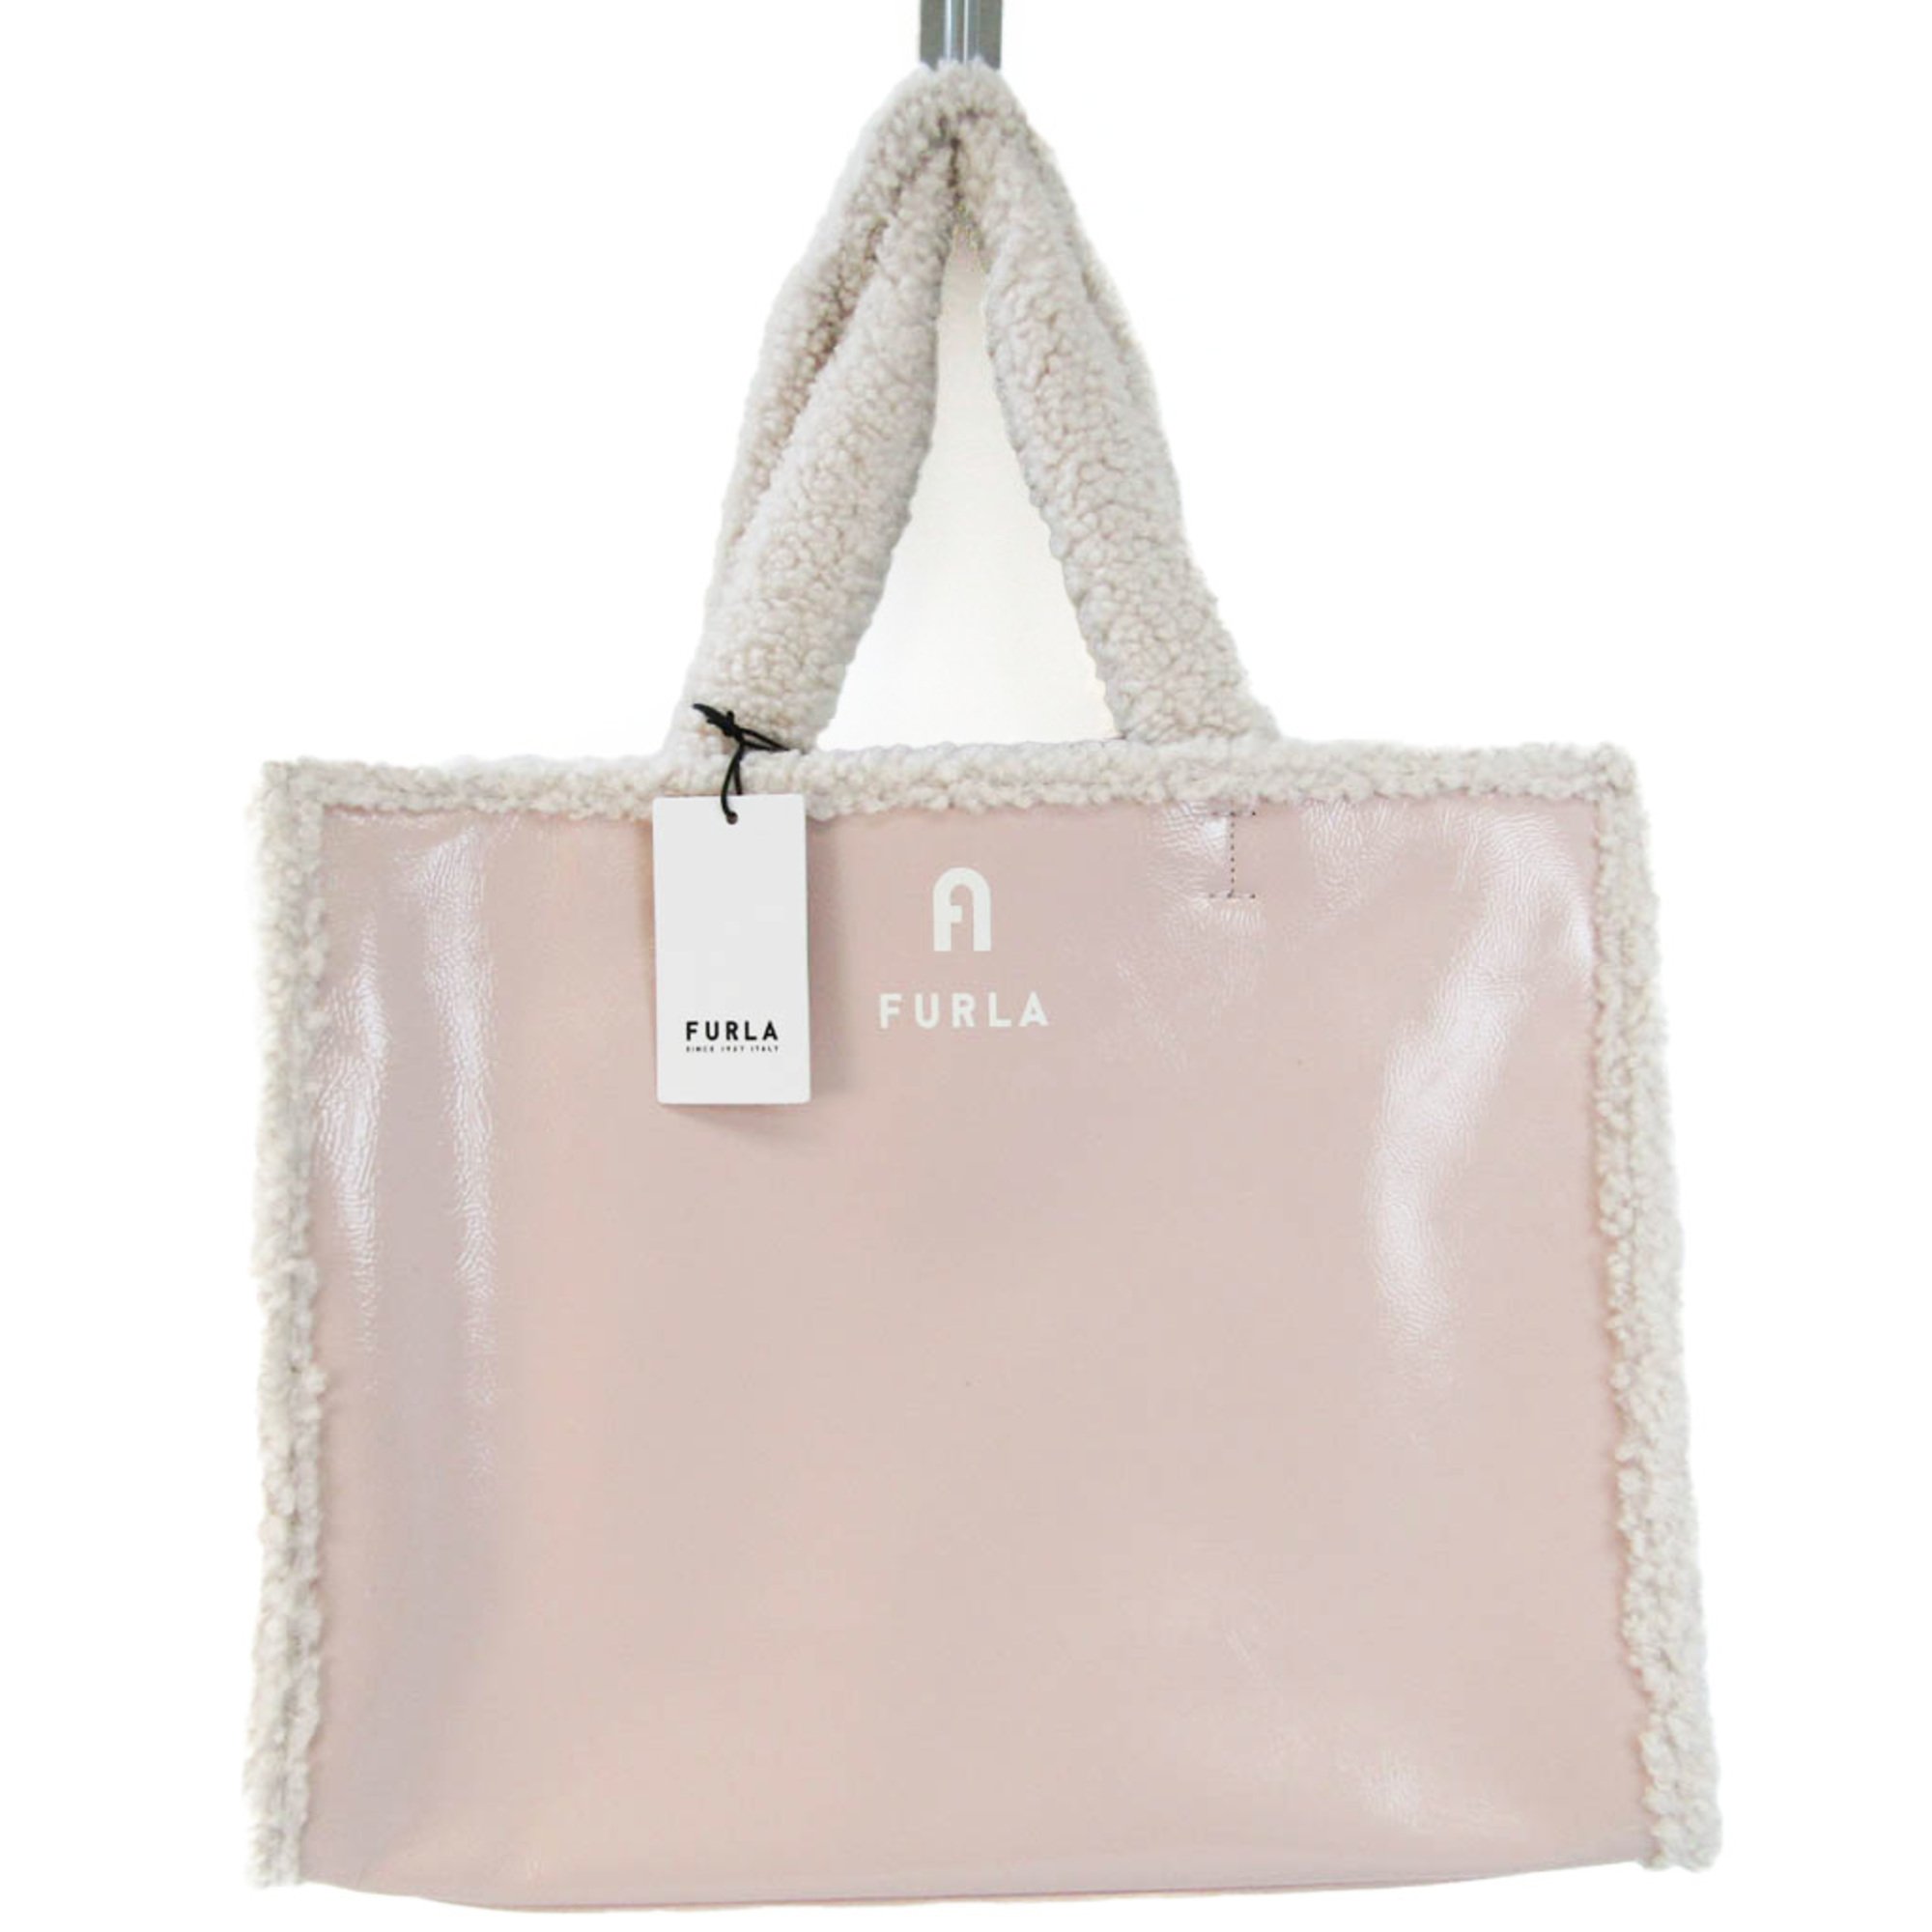 Furla OPPORTUNITY L TOTE WB00255 BX0386 Women's Patent Leather,Cotton Tote Bag Light Pink